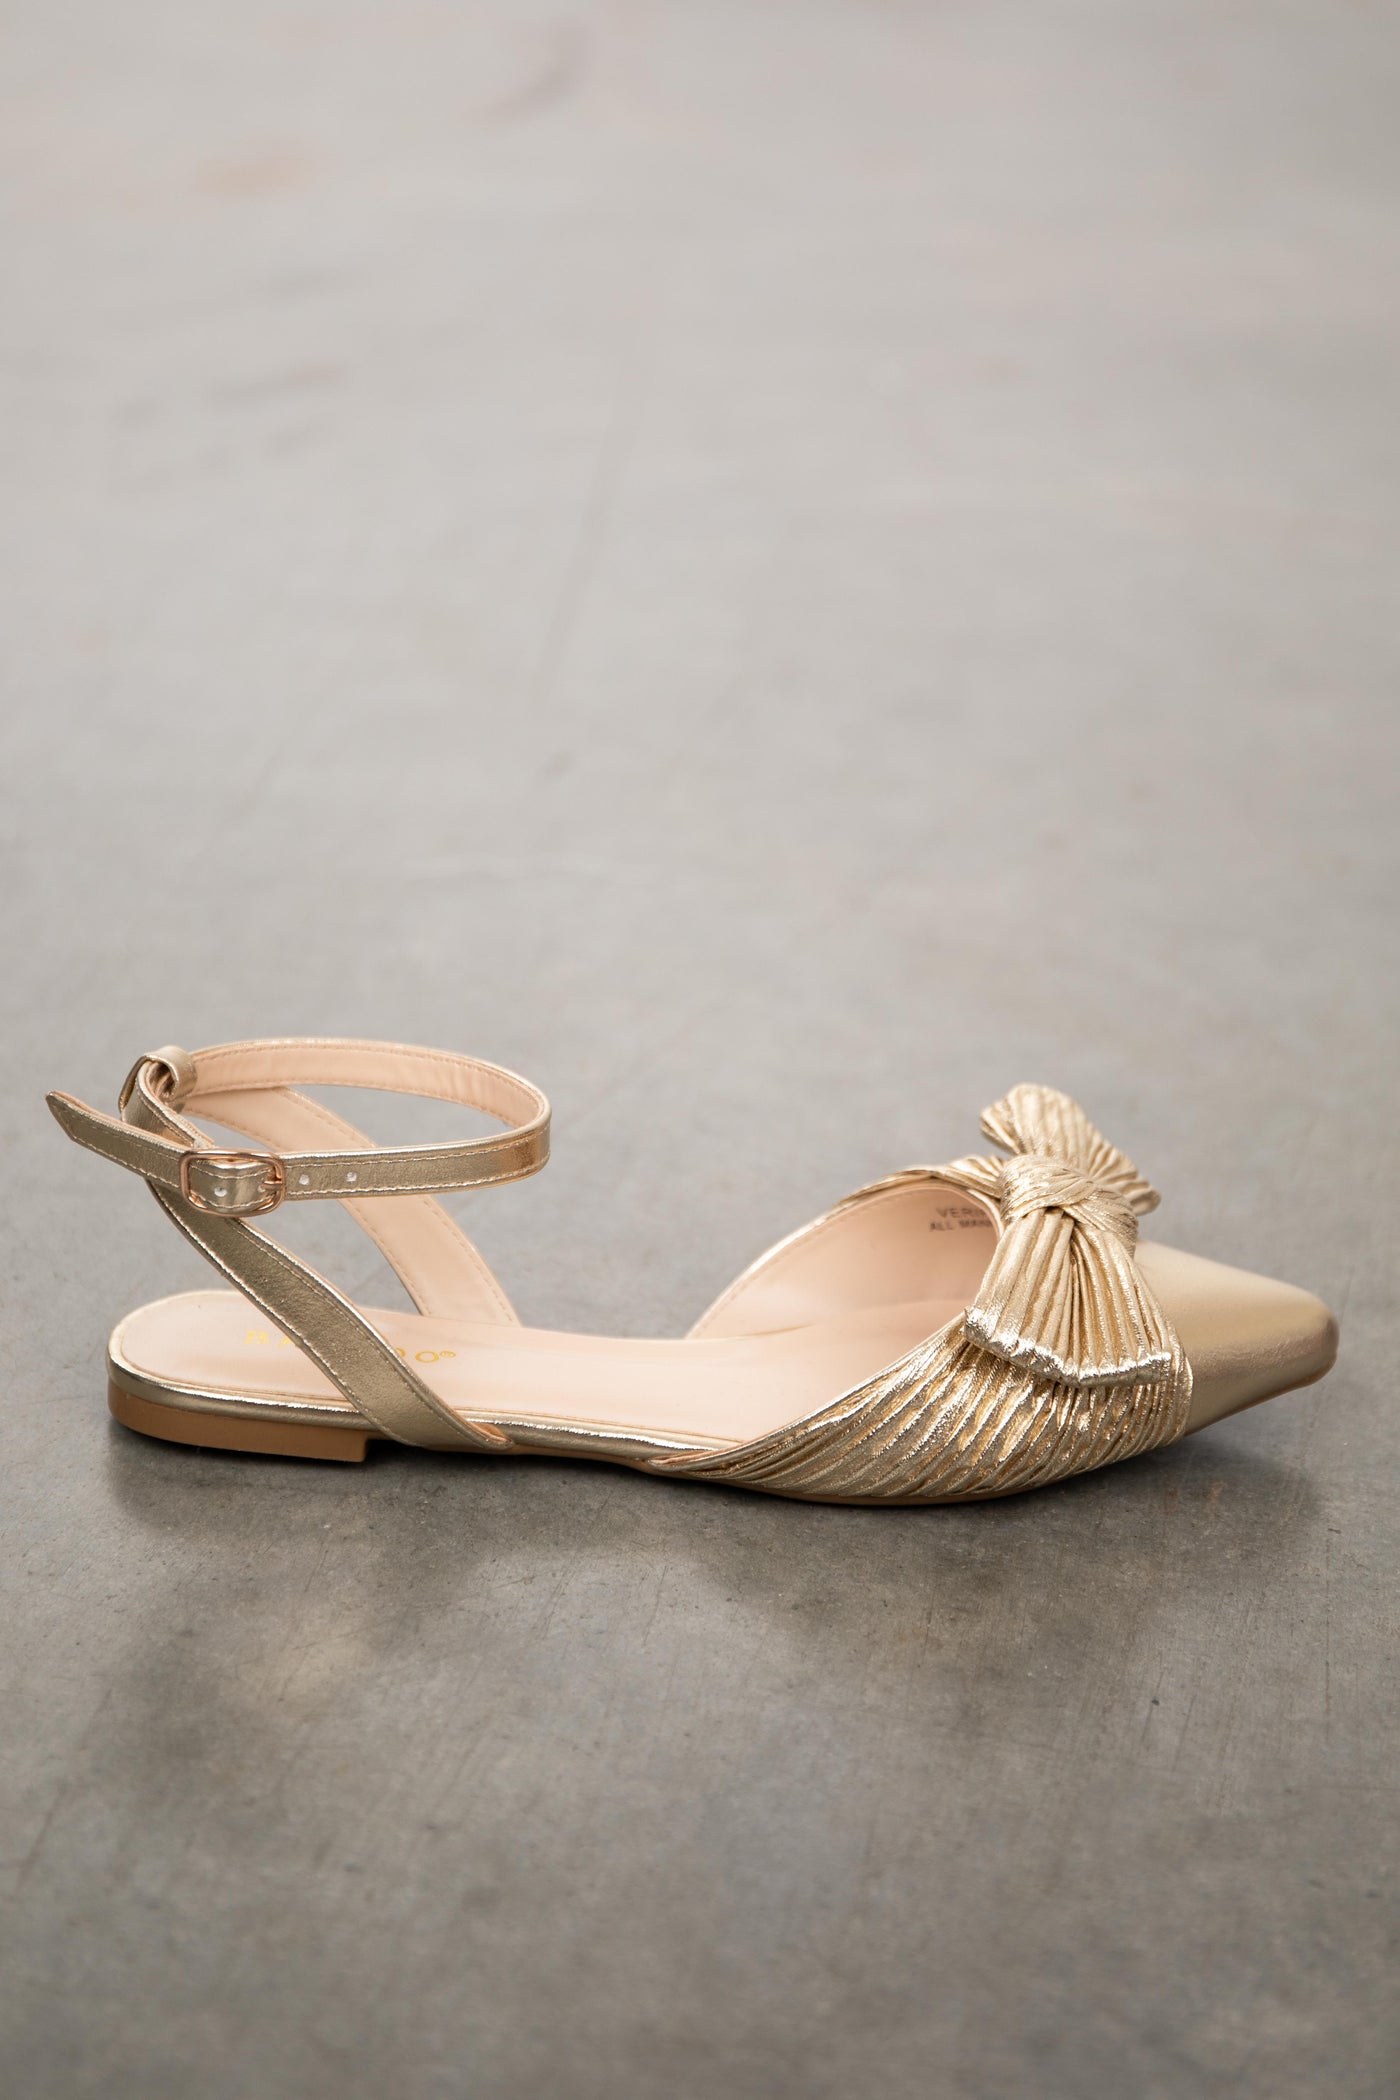 Gold Metallic Pointed Toe Flats with Bow Detail